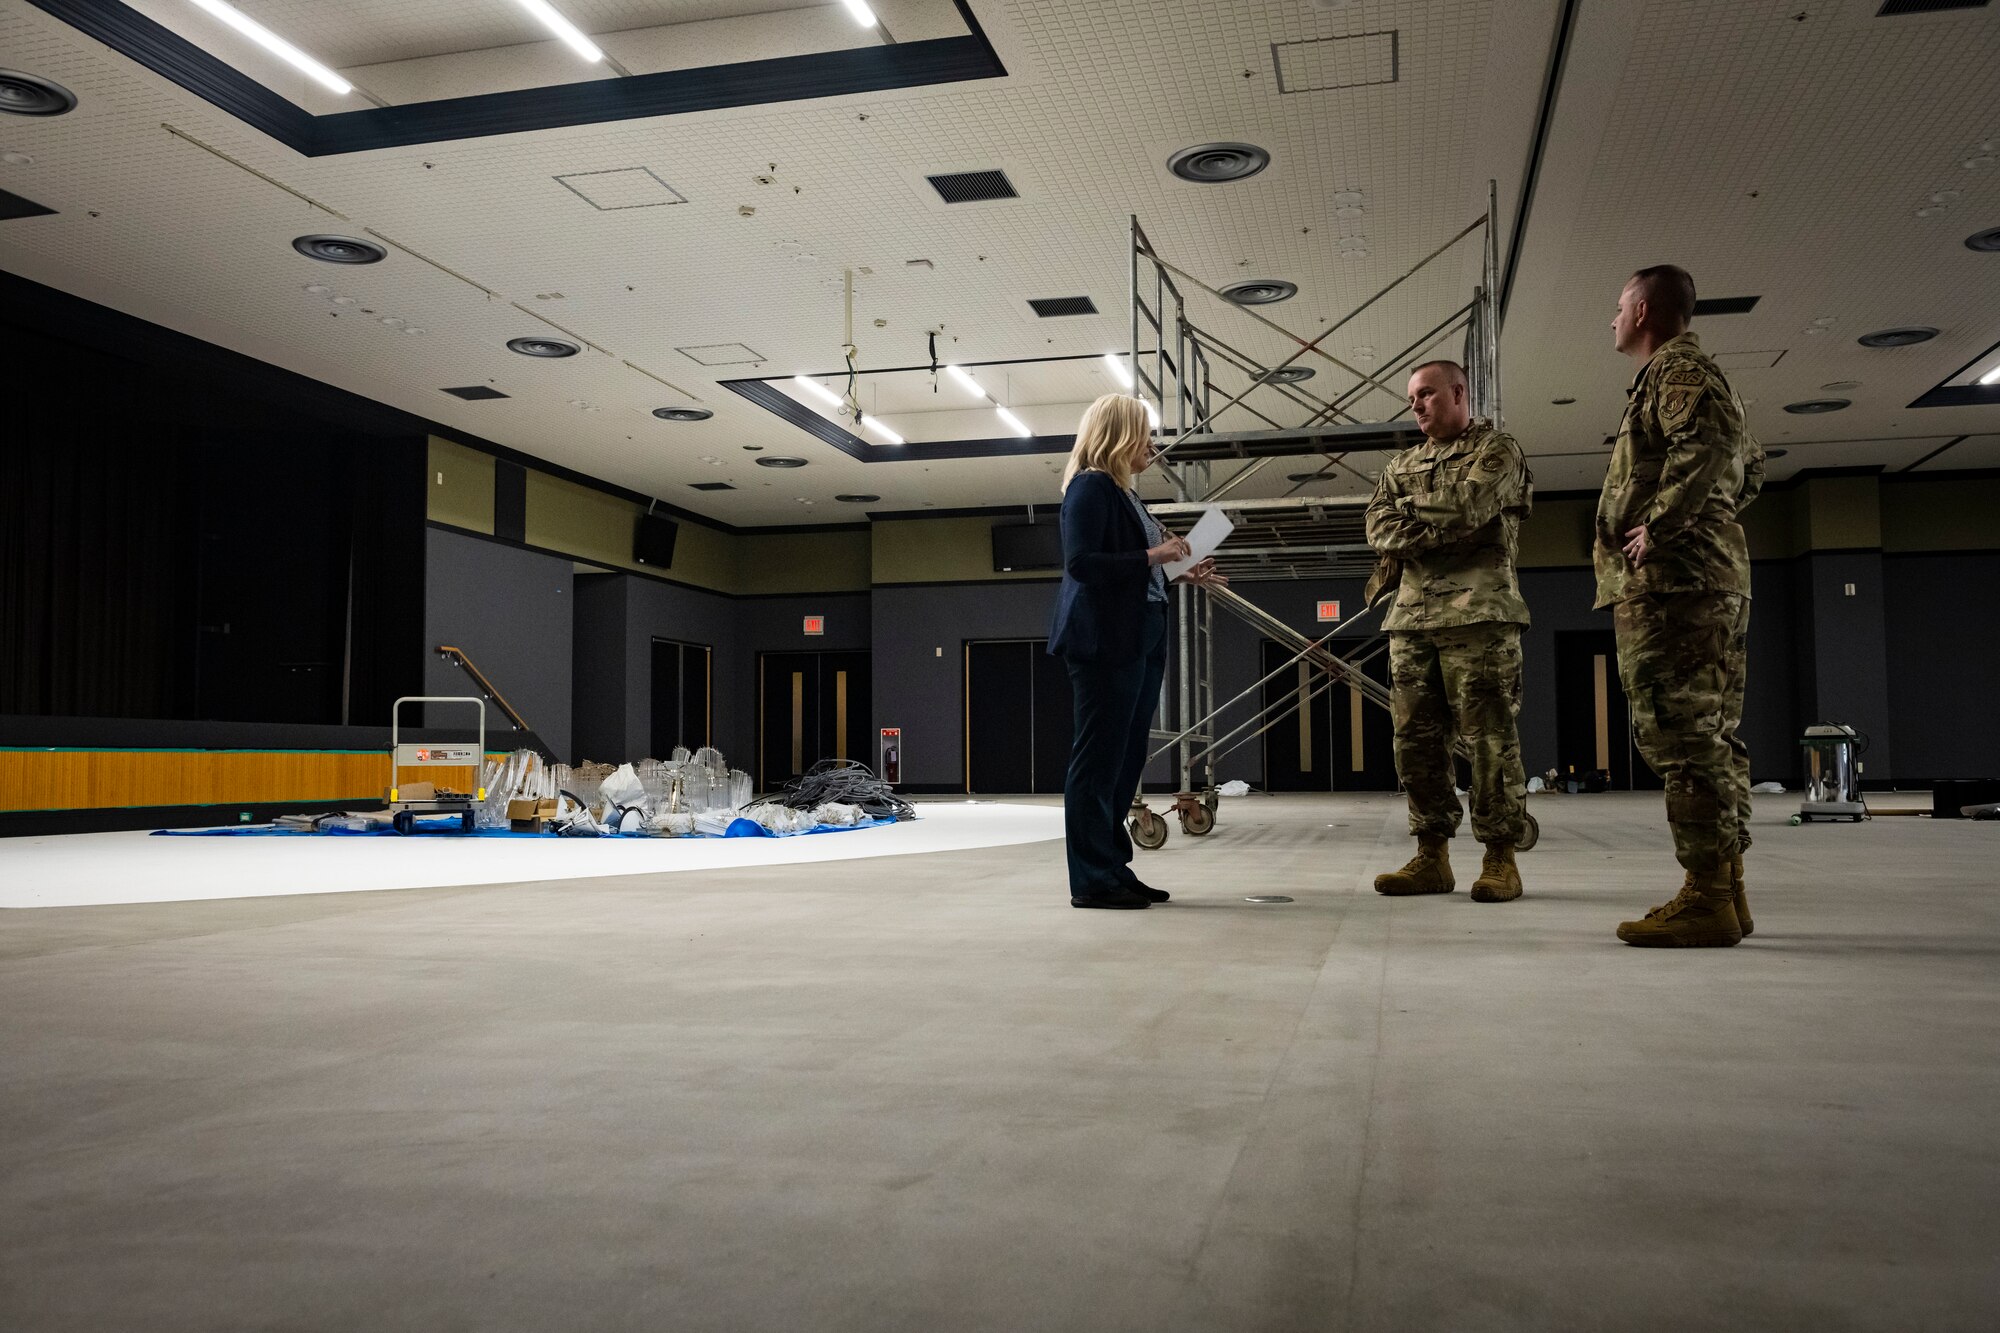 U.S. military members in uniform and civilians talk in an empty room under construction.